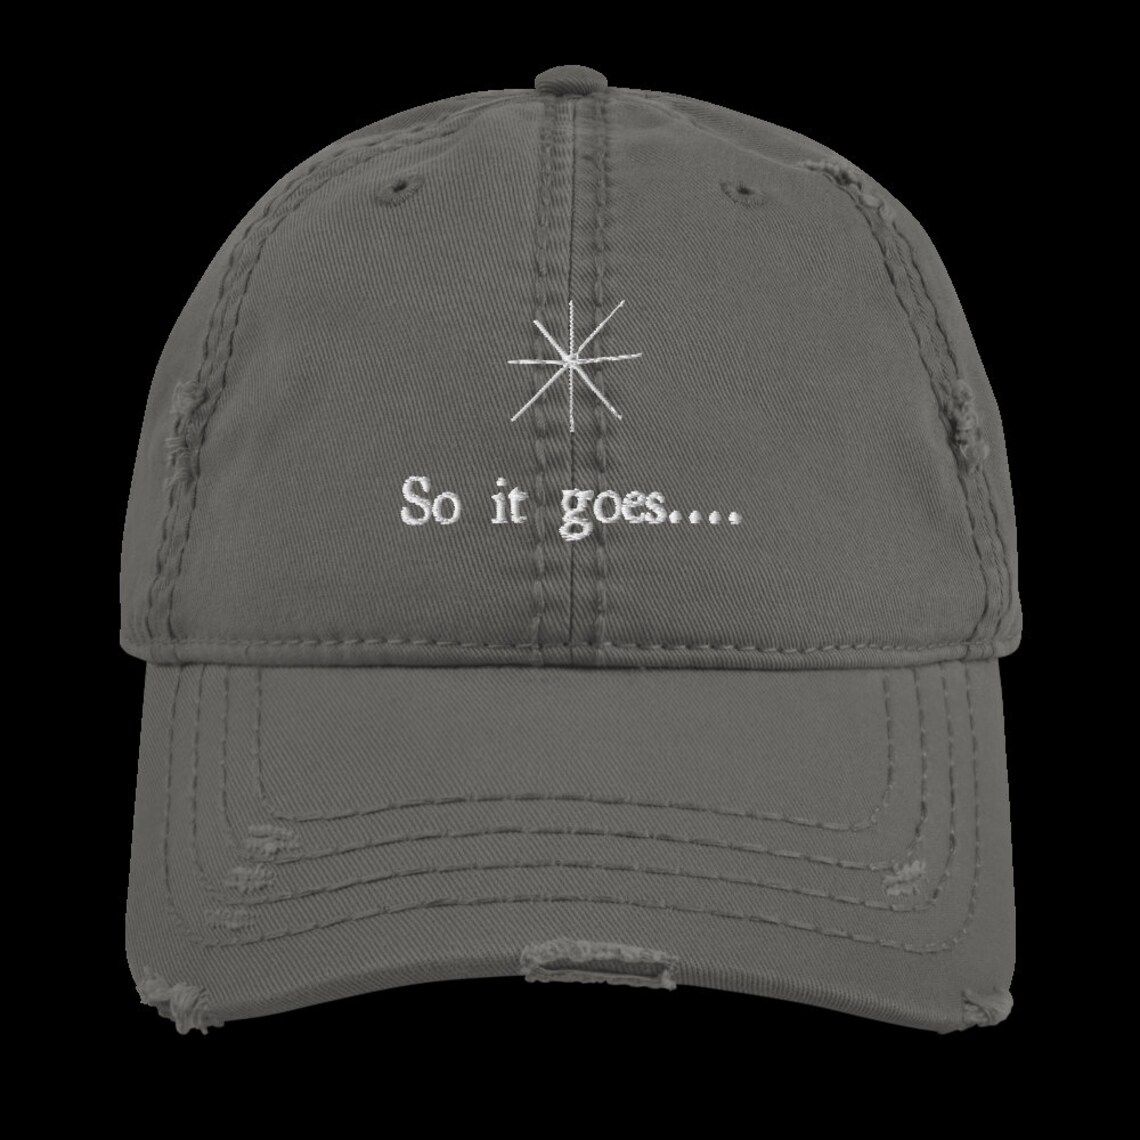 hat that says "So it goes"